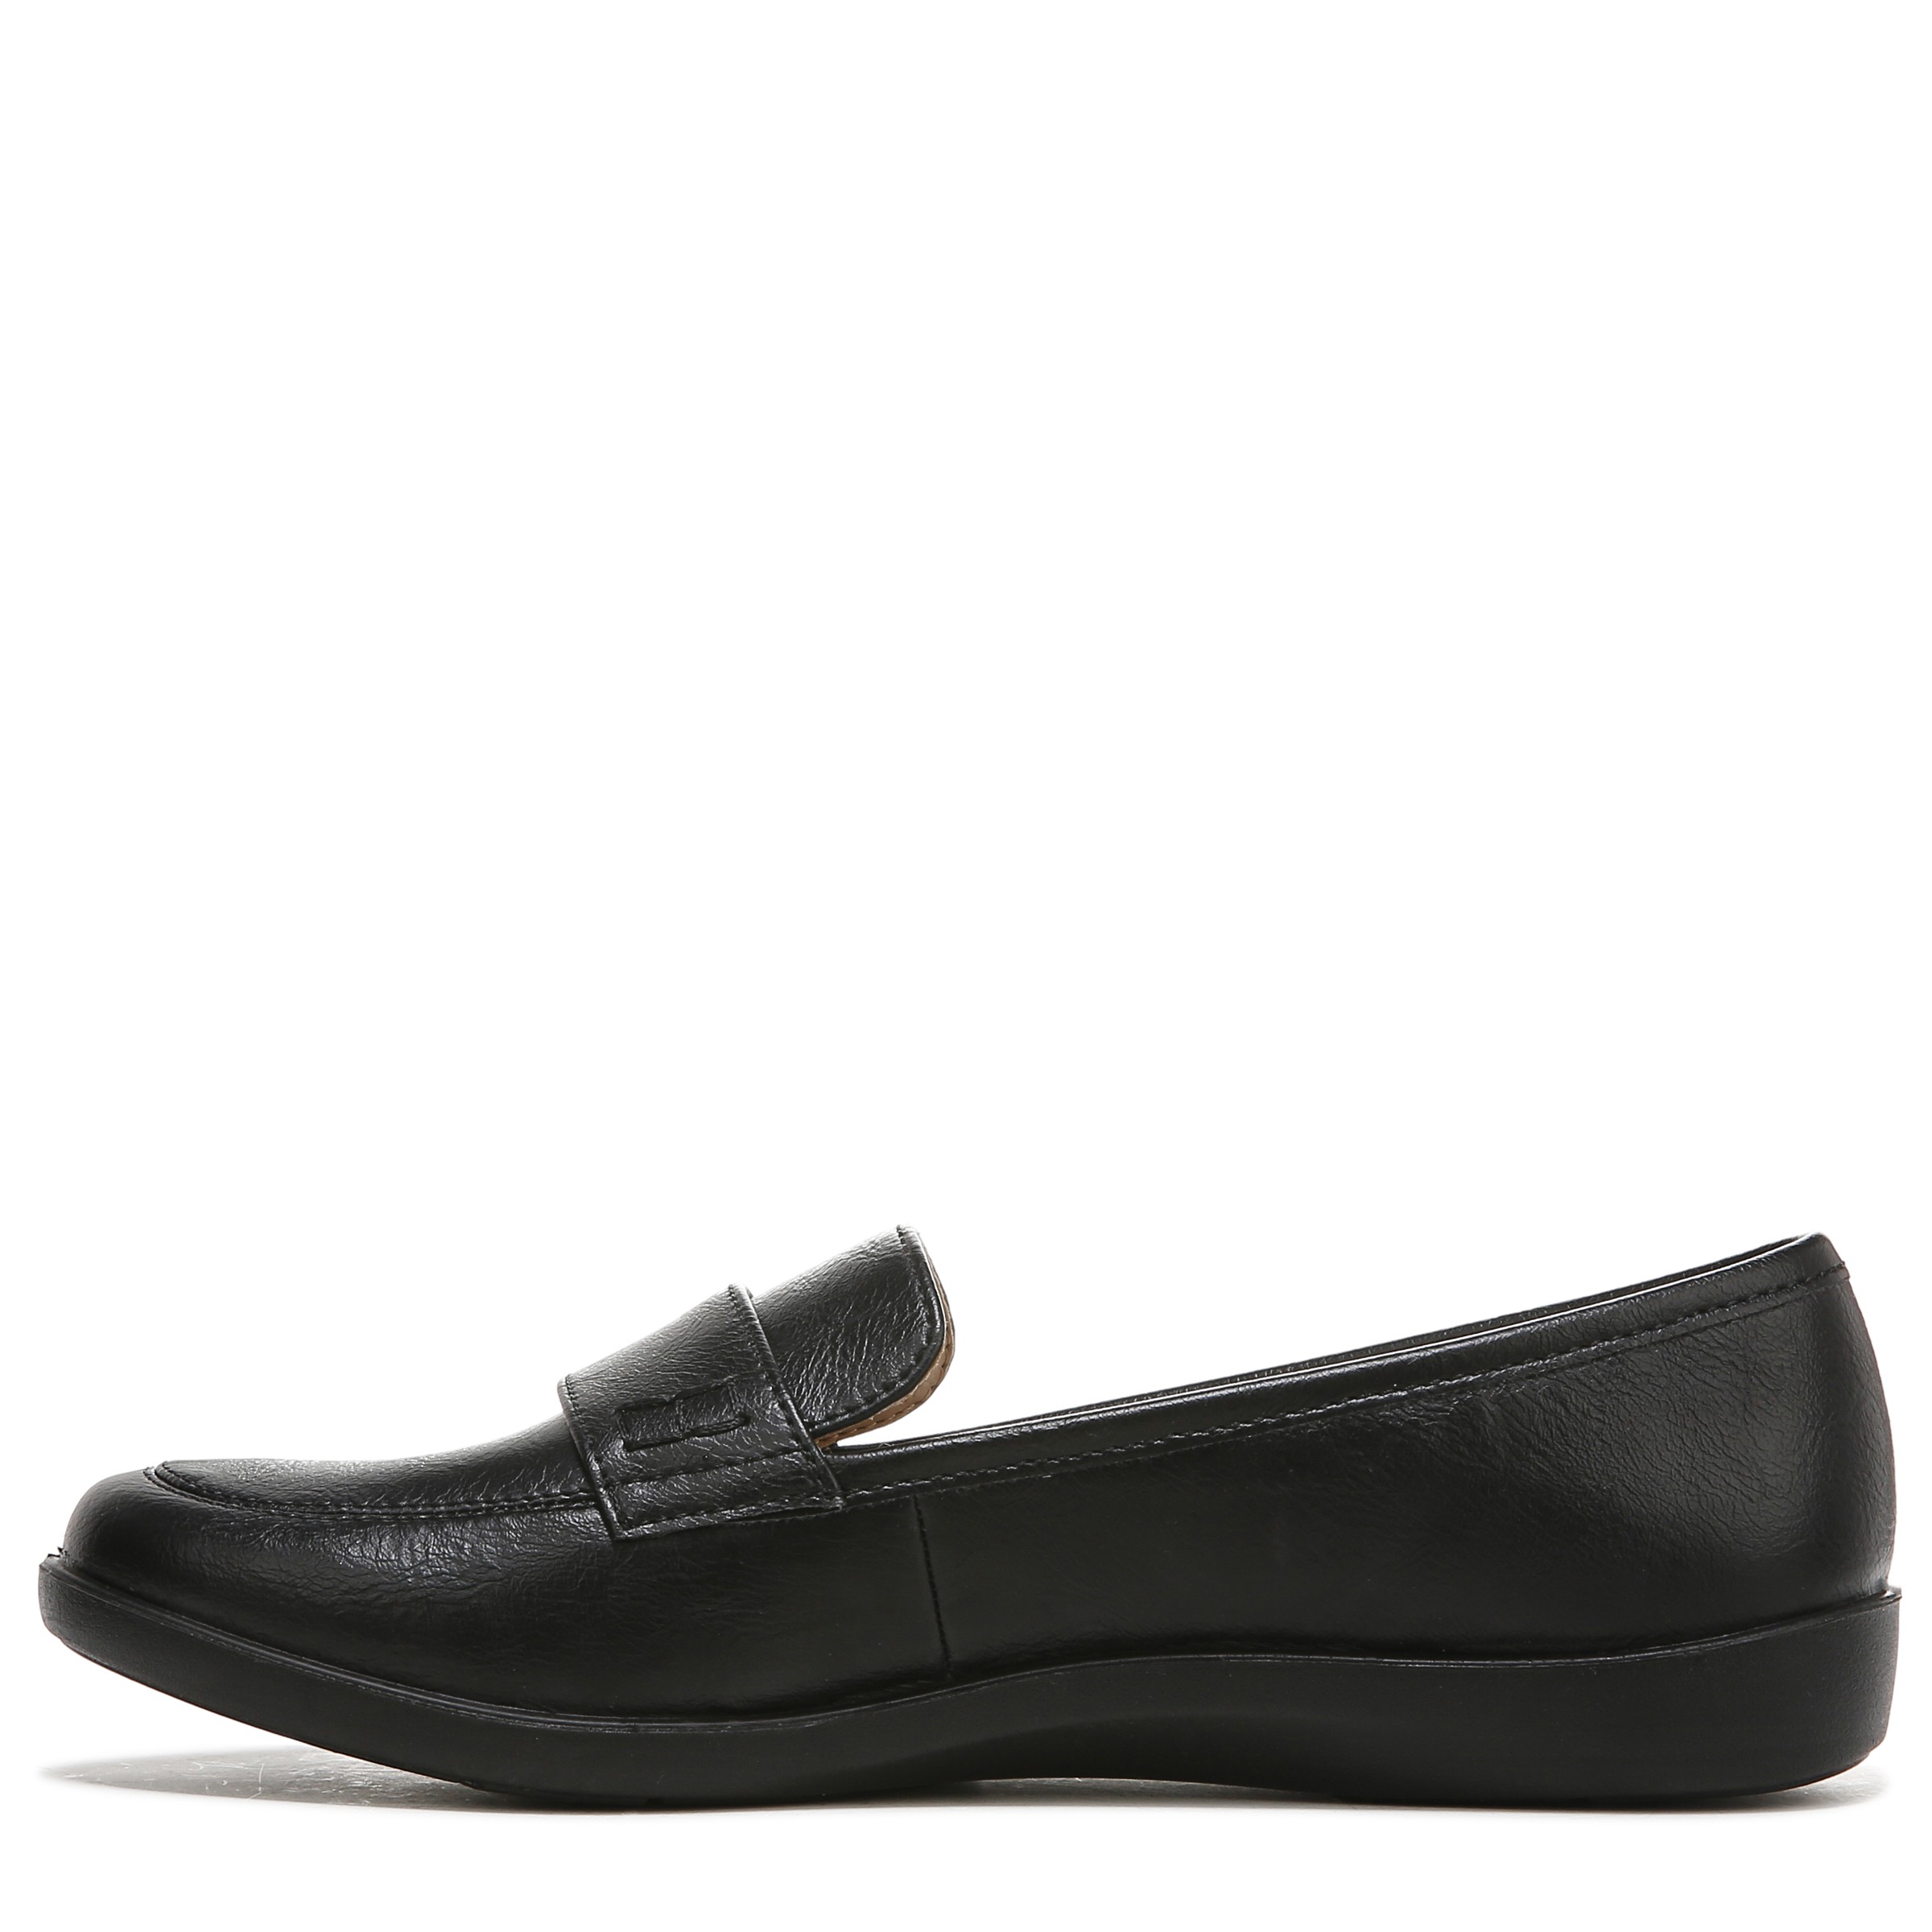 Women's Nico Slip On Casual Loafer